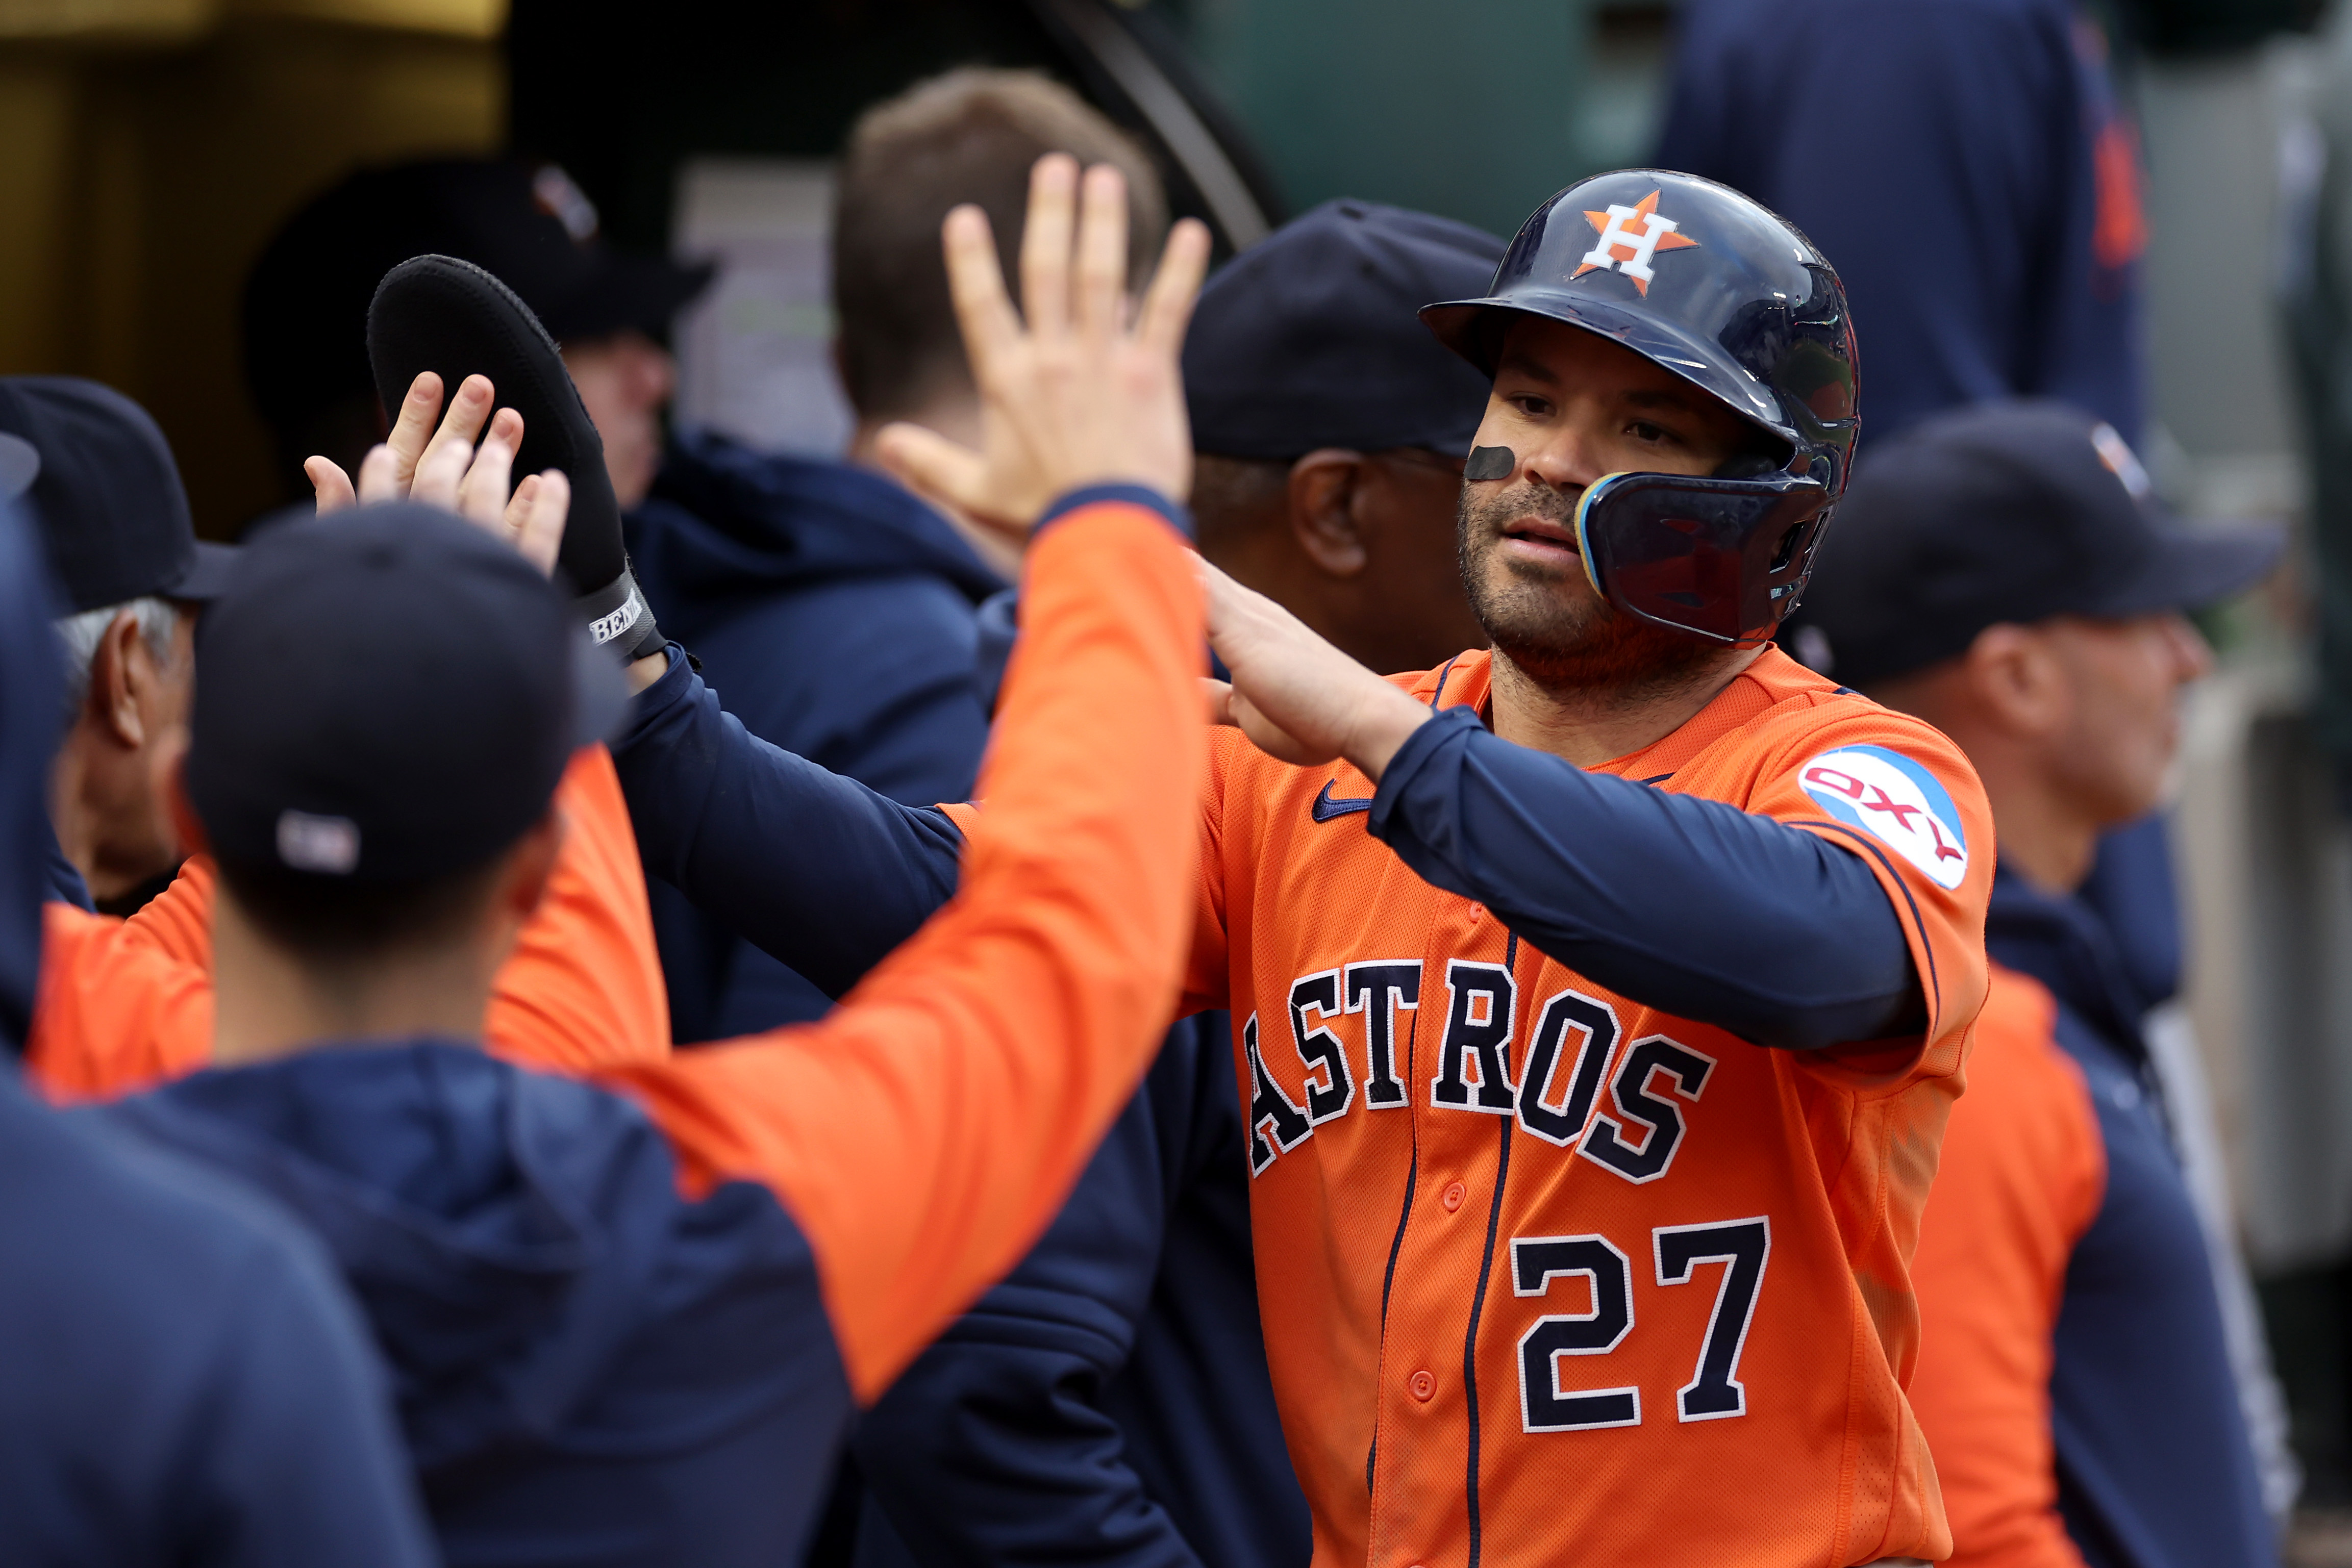 Jose Altuve of the Houston Astros is congratulated by teammates after he scored against the Oakland Athletics in the third inning at RingCentral Coliseum on May 26, 2023 in Oakland, California.